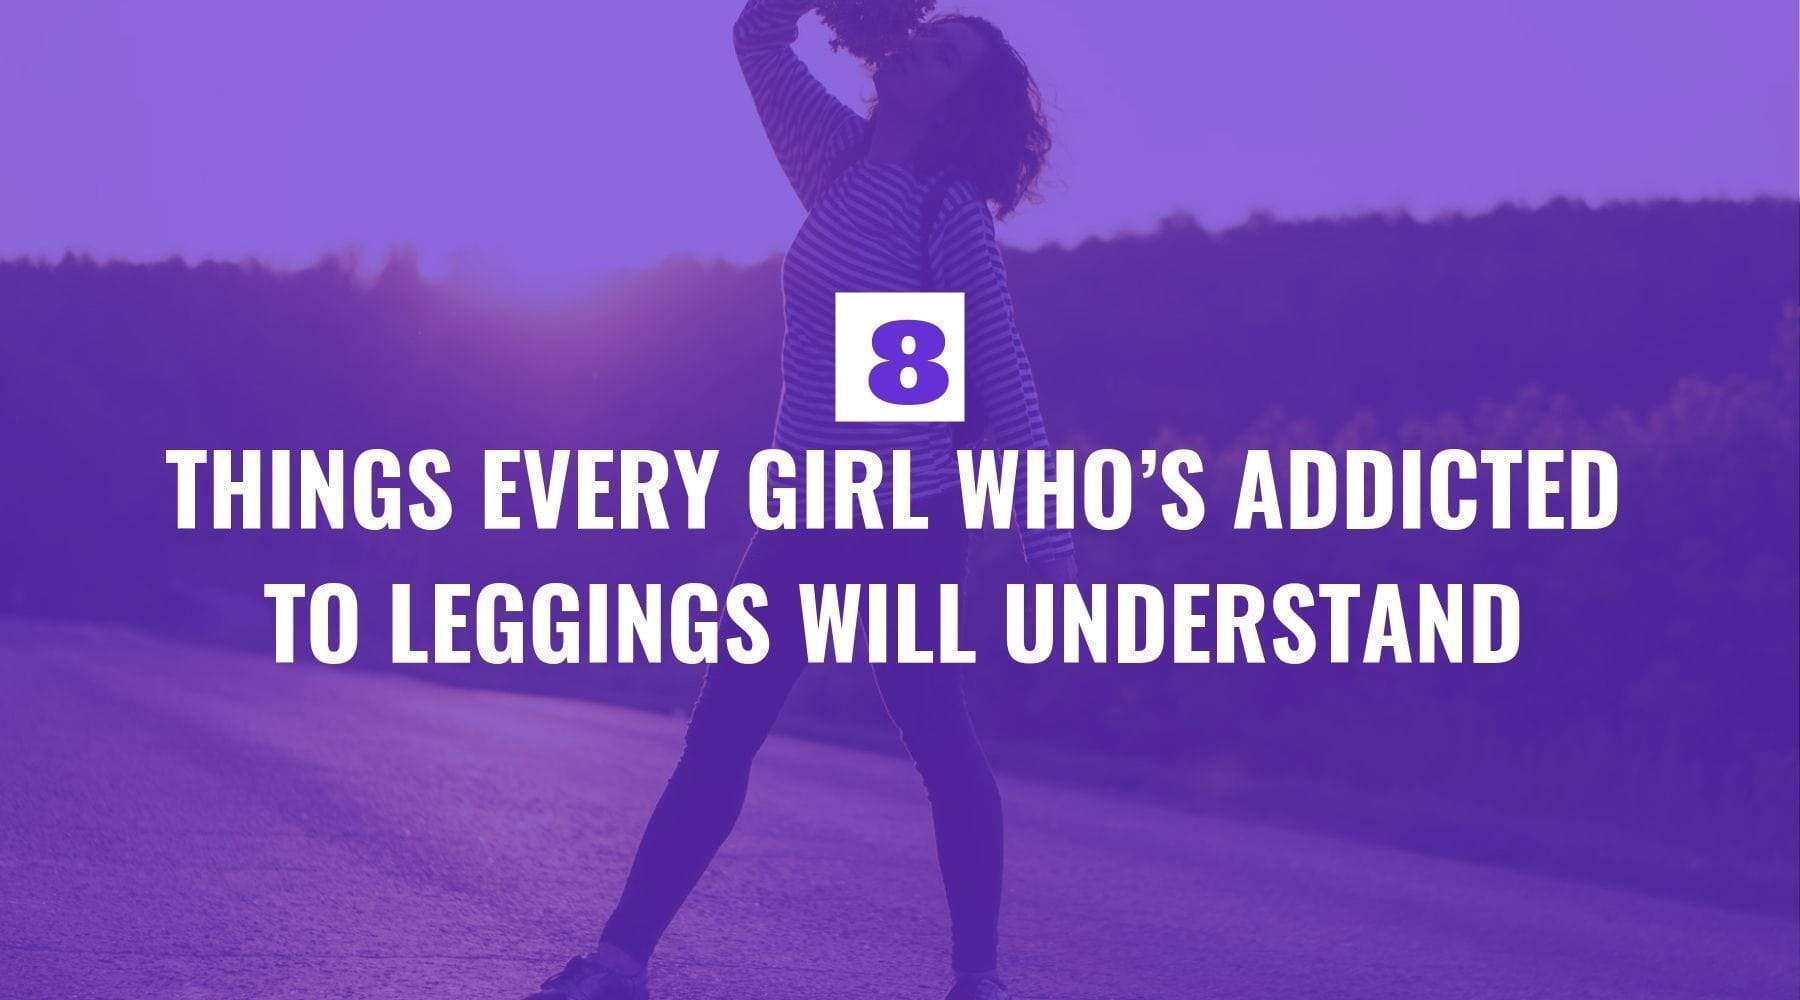 Eight Things Every Girl Who’s Addicted to Leggings Will Understand